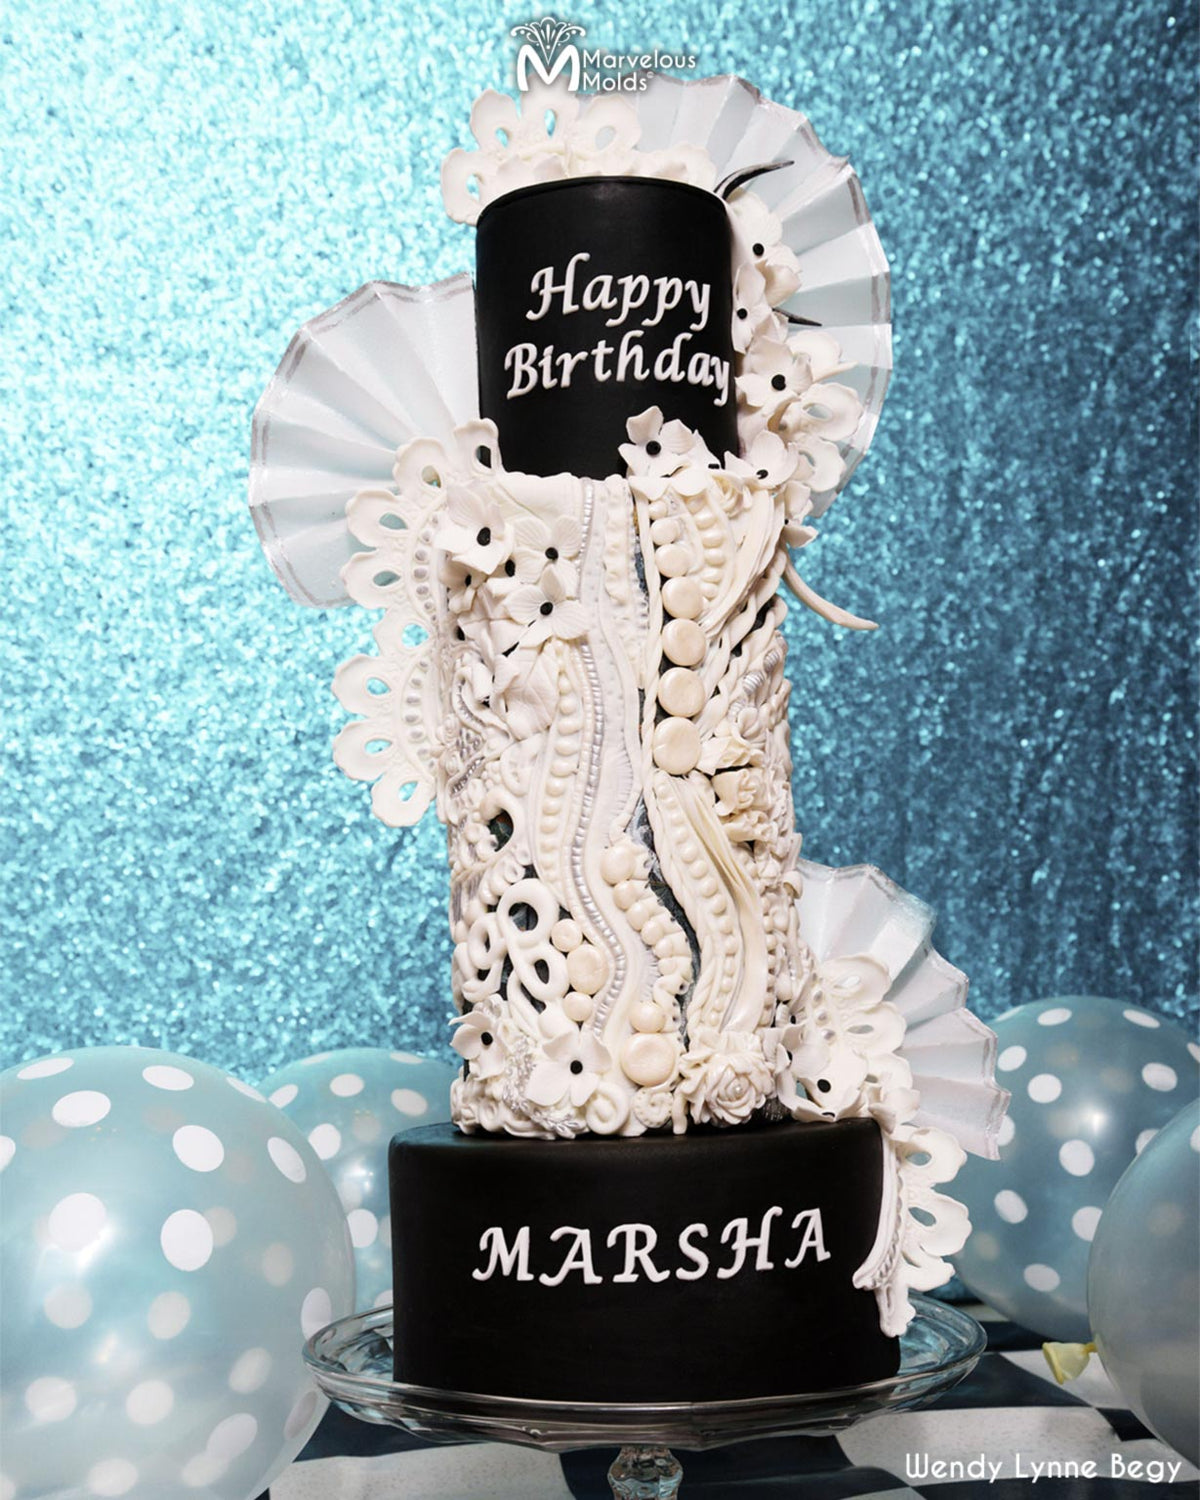 Happy Birthday Black and White Cake decorated using the Calligraphy Happy Birthday Letter Cutting Flexabet by Marvelous Molds